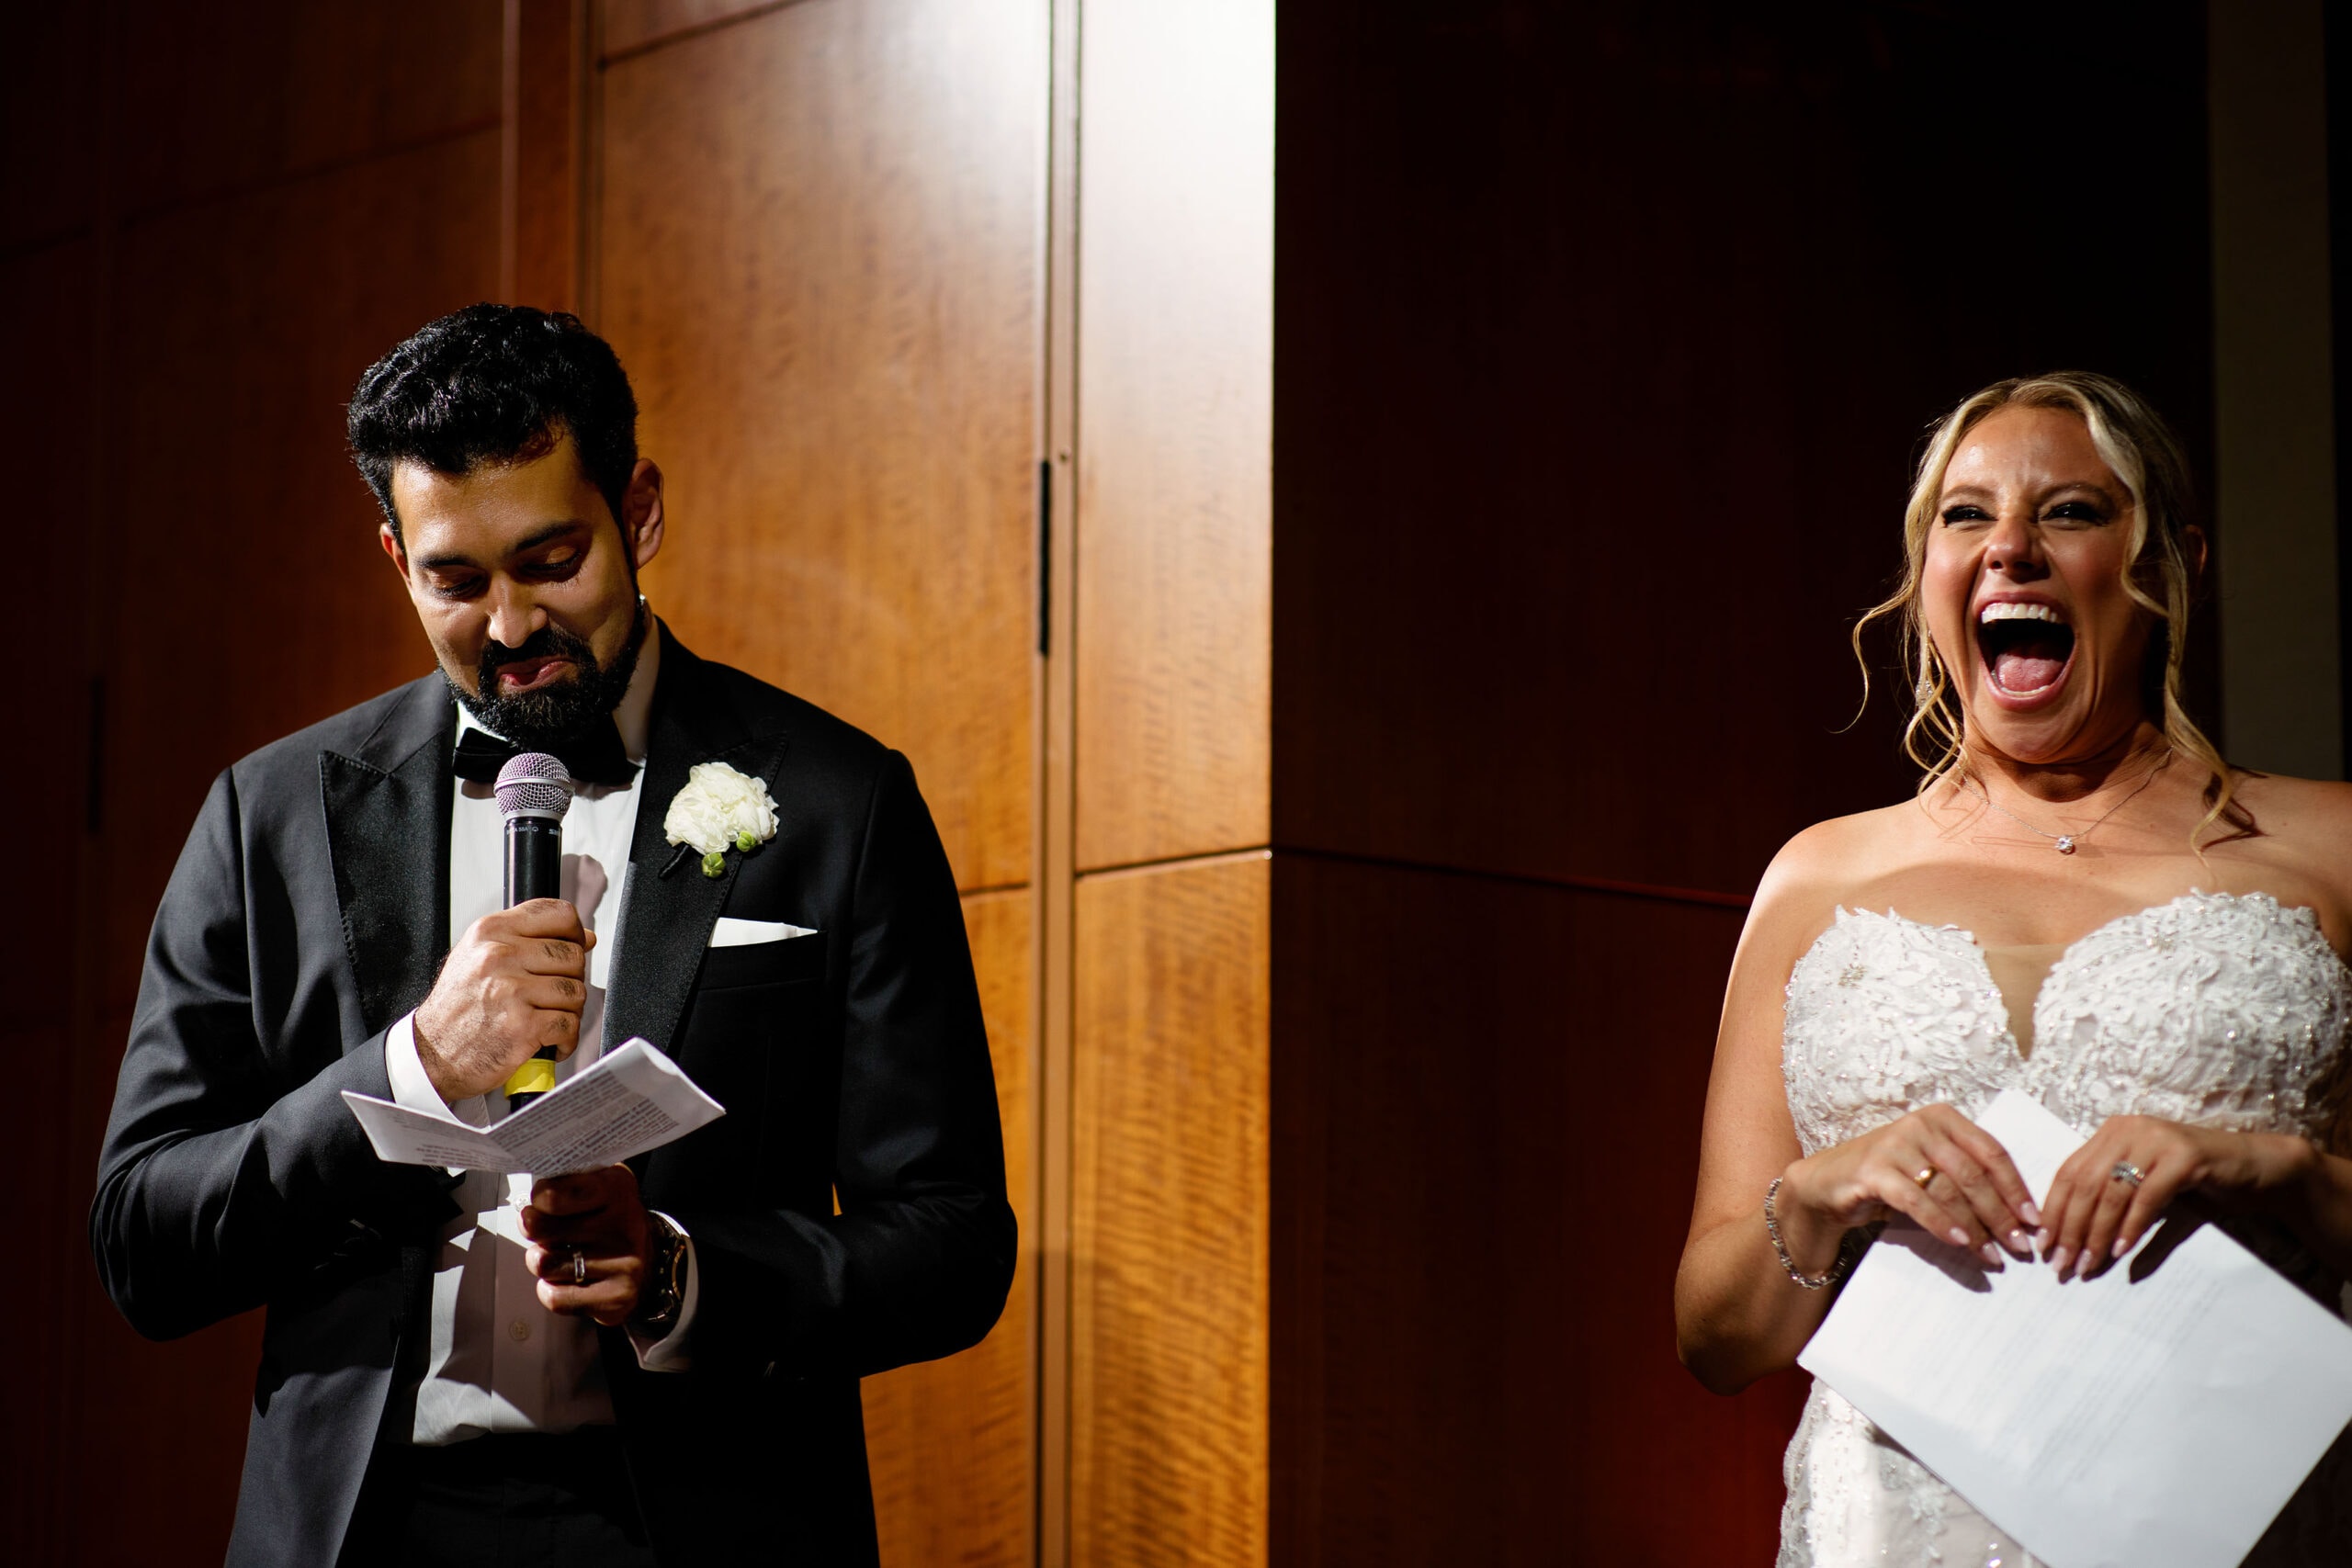 The bride laughs as the groom gives a toast during the wedding